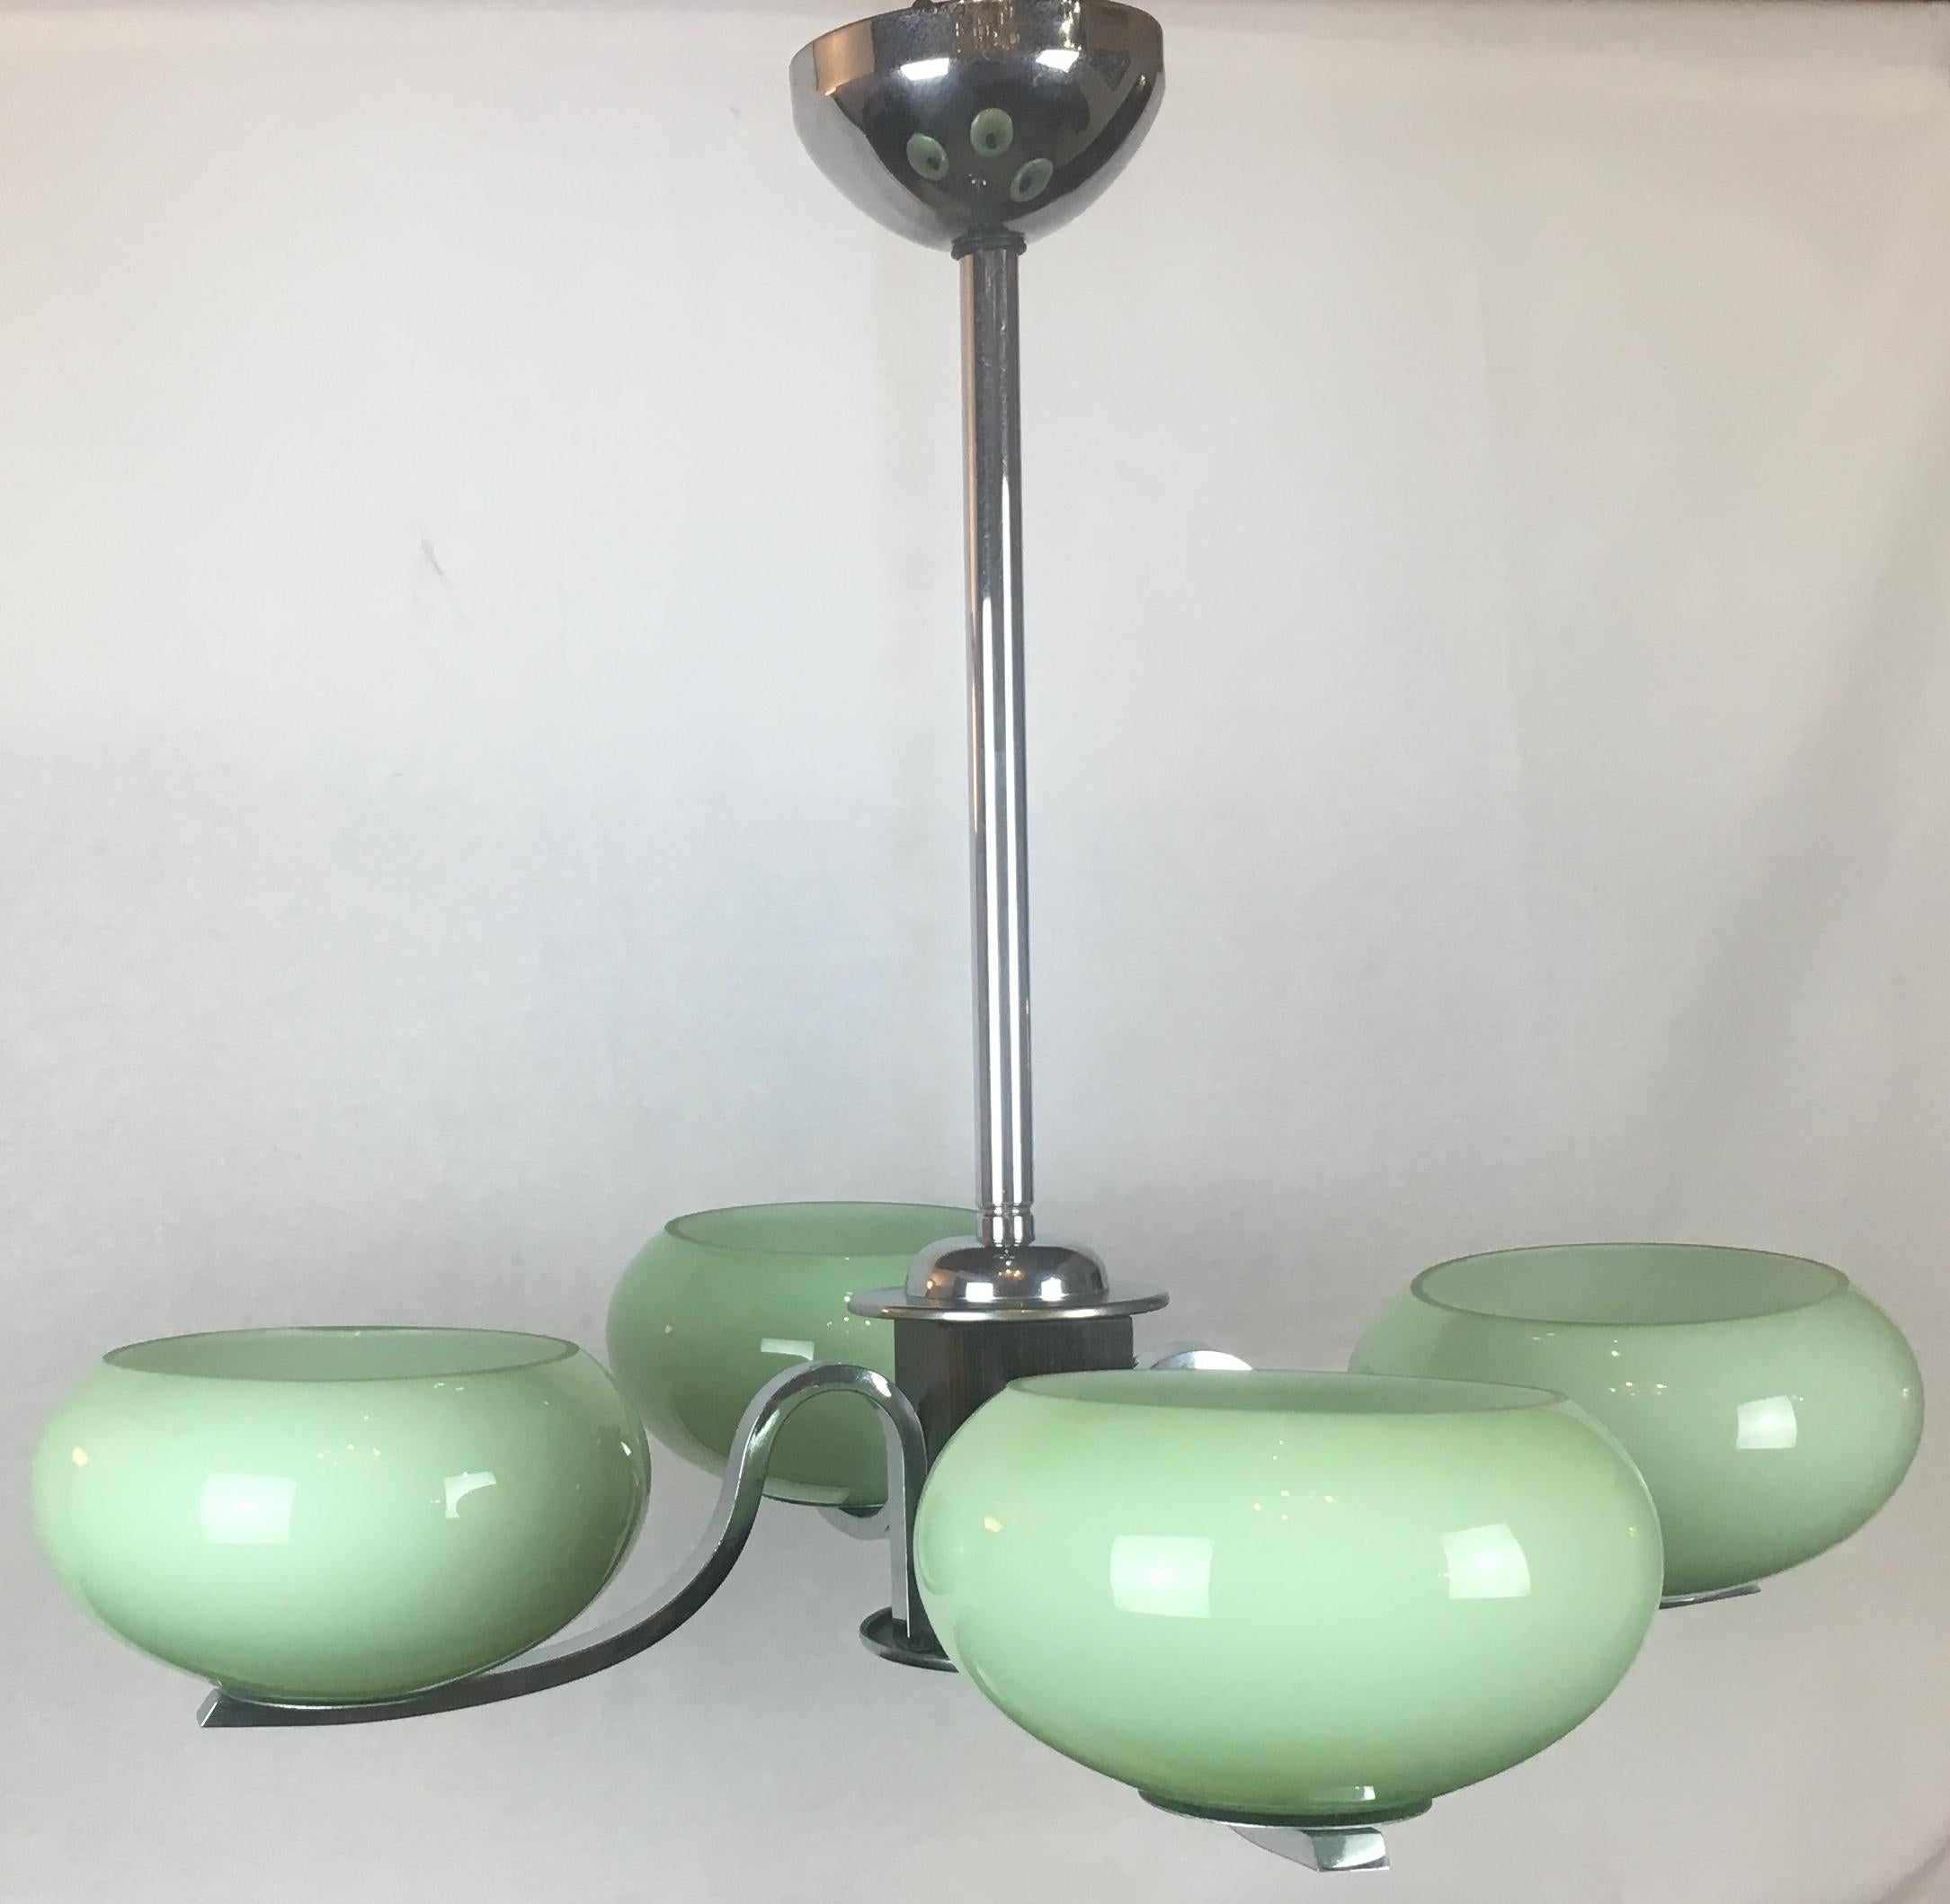 A gorgeous French Art Deco chandelier with pale green opaline shades. A very nice decorative piece that would look great in a midcentury style home, as well as, any contemporary setting.

This light is made of rosewood and chrome. Originates from